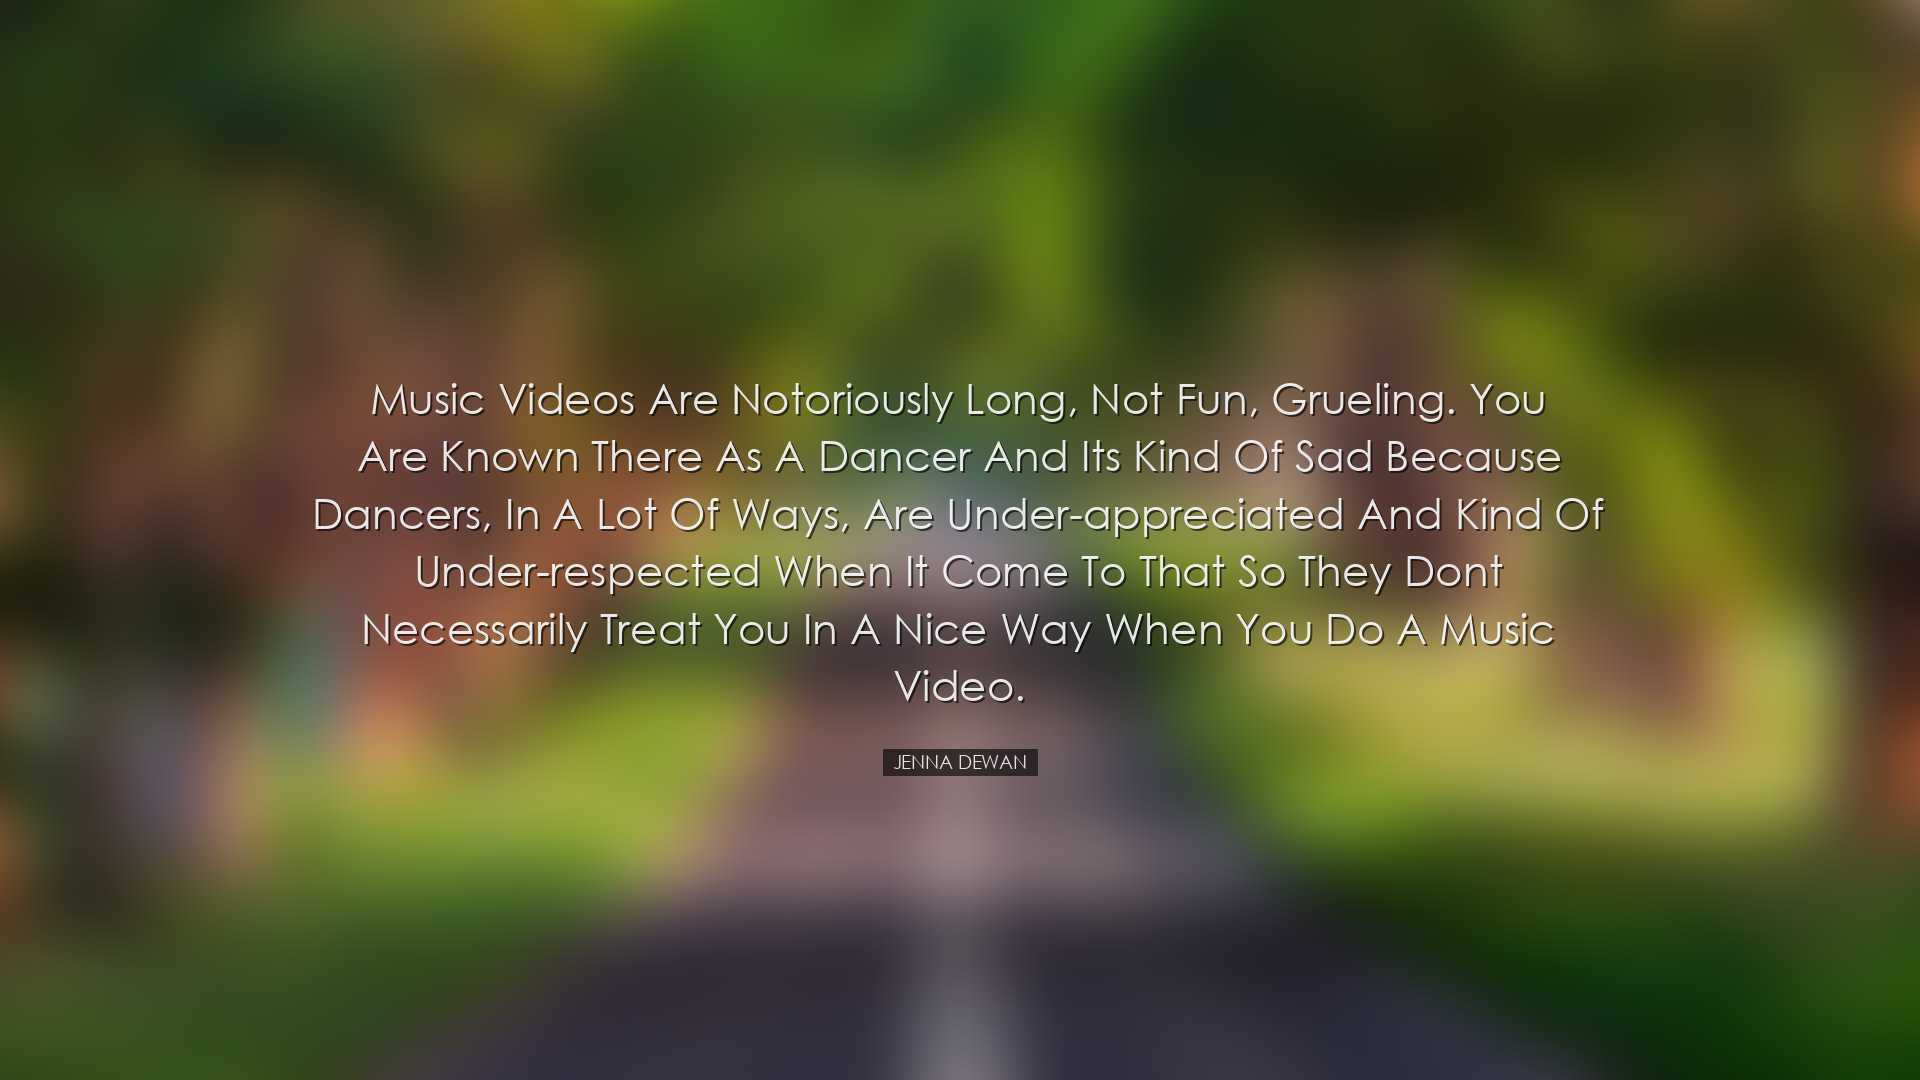 Music videos are notoriously long, not fun, grueling. You are know